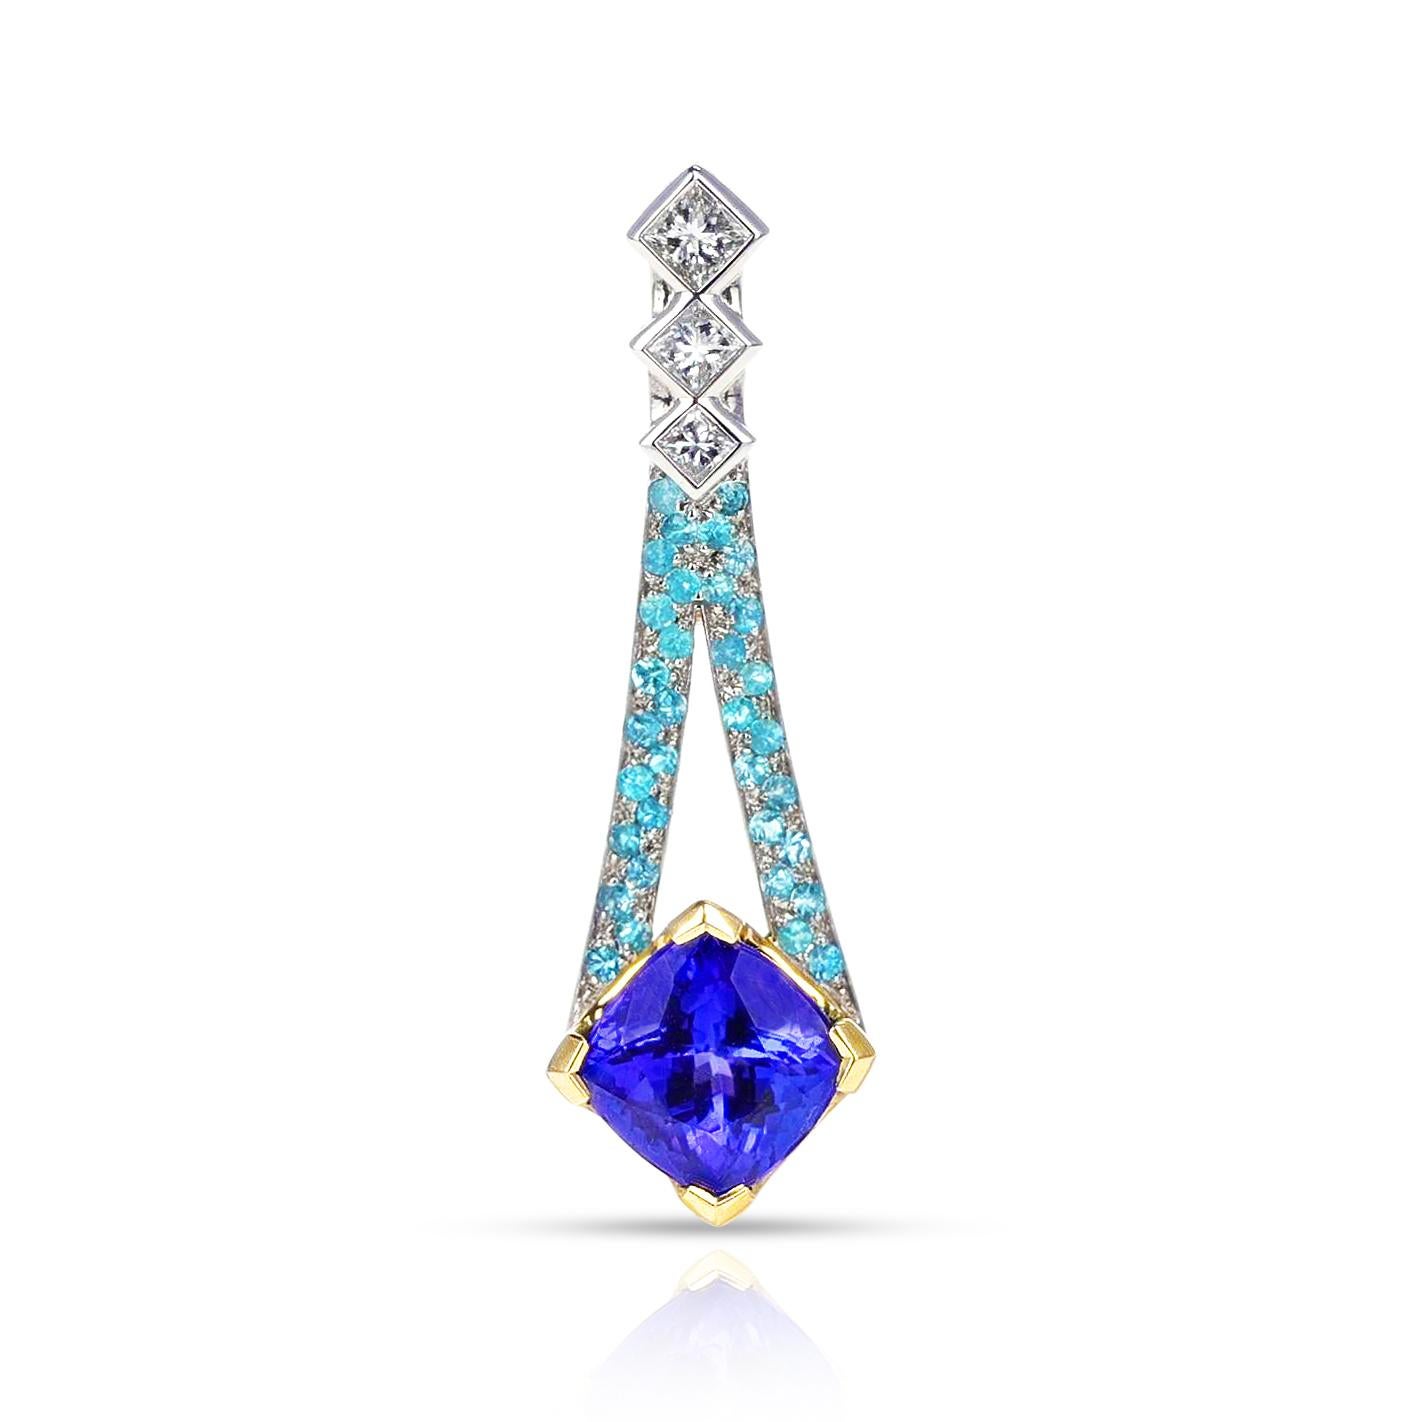 A Tanzanite Pendant with Brazilian Paraiba Tourmaline and Diamonds made in 18 Karat Gold. The Paraiba weighs appx. 0.30 carats and the diamonds weigh 0.35 carats. The Tanzanite weighs 2.87 carats. The total weight of the pendant is 4.15 grams. The